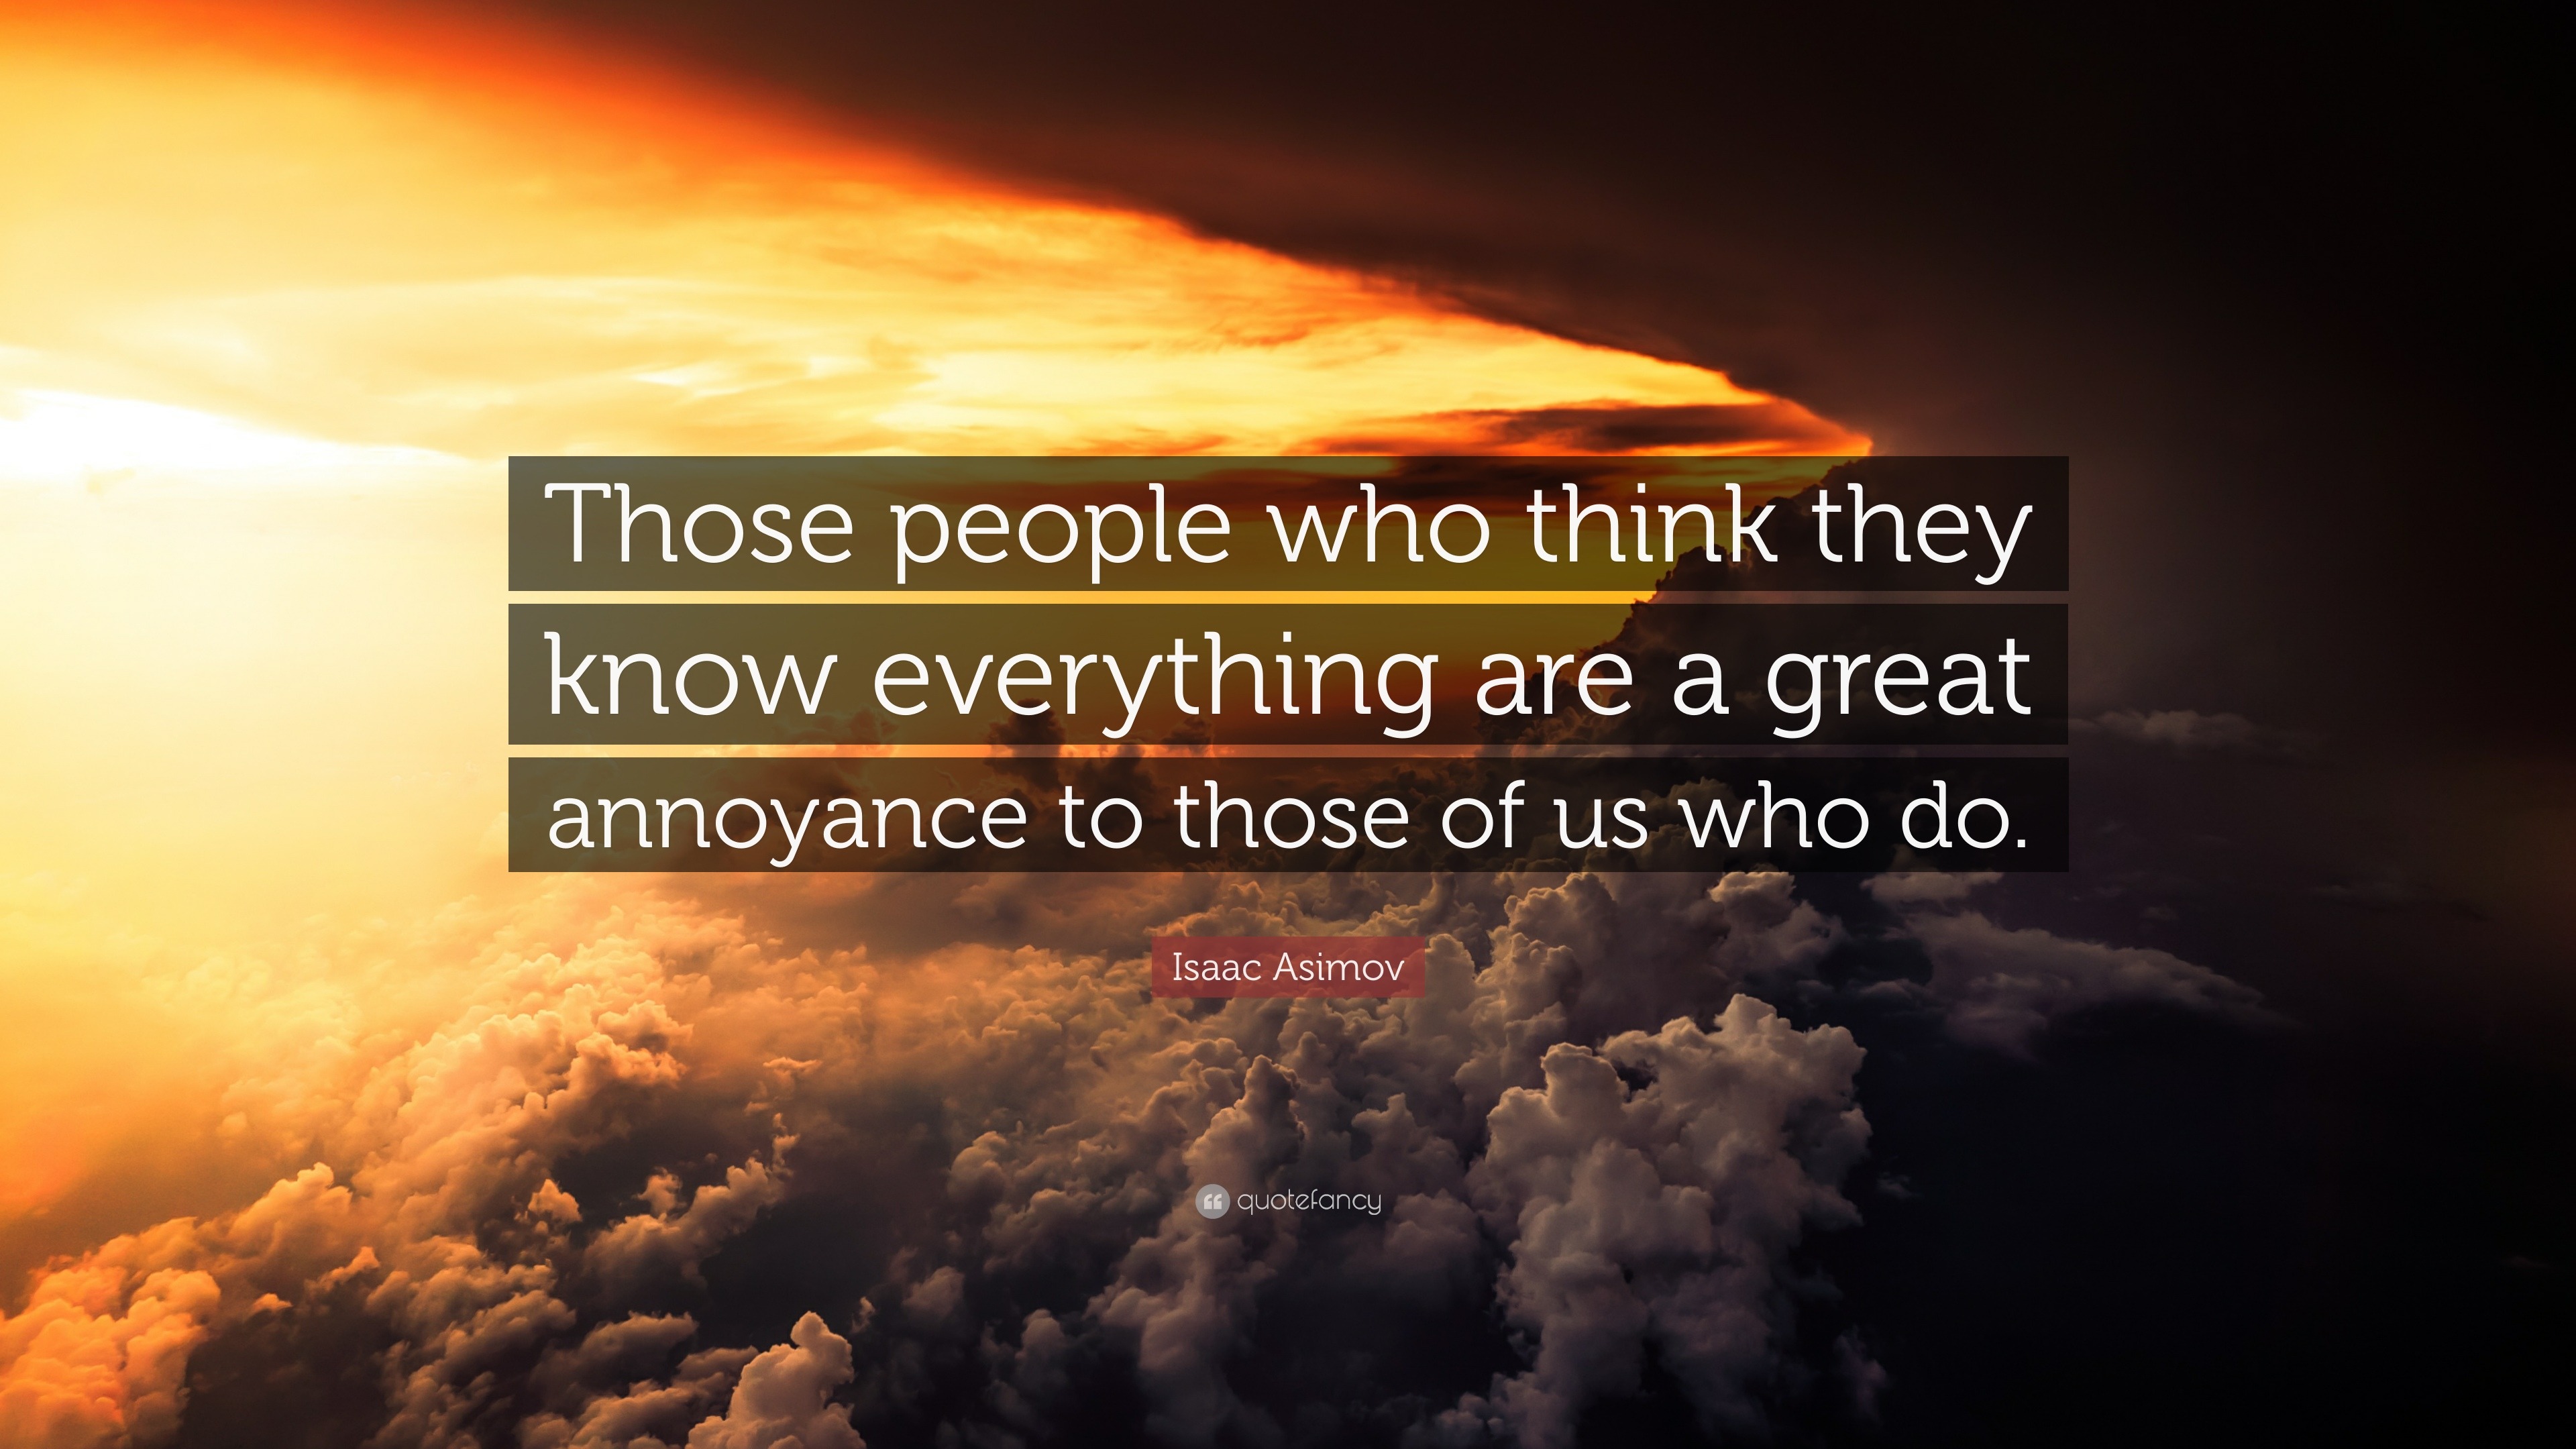 Isaac Asimov Quote “those People Who Think They Know Everything Are A Great Annoyance To Those 0517